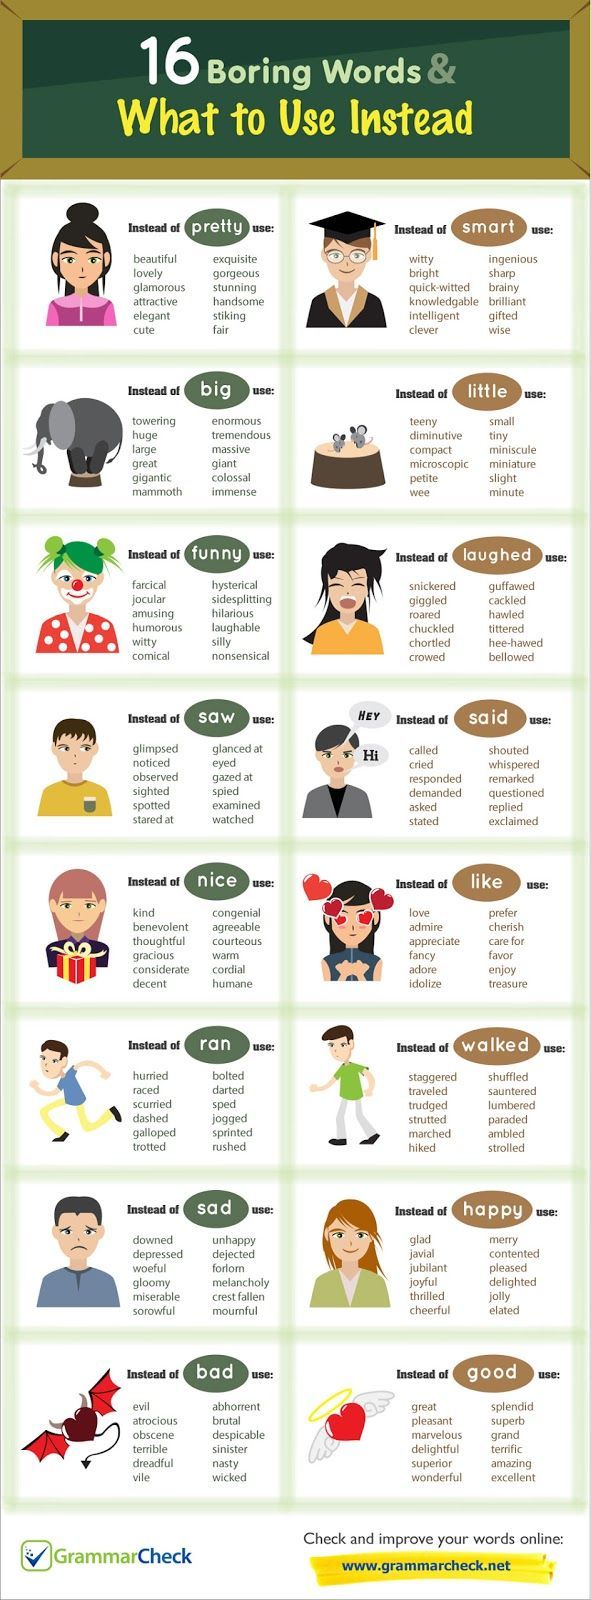 MOMFILES.com: 16 Boring Words & What to Use Instead